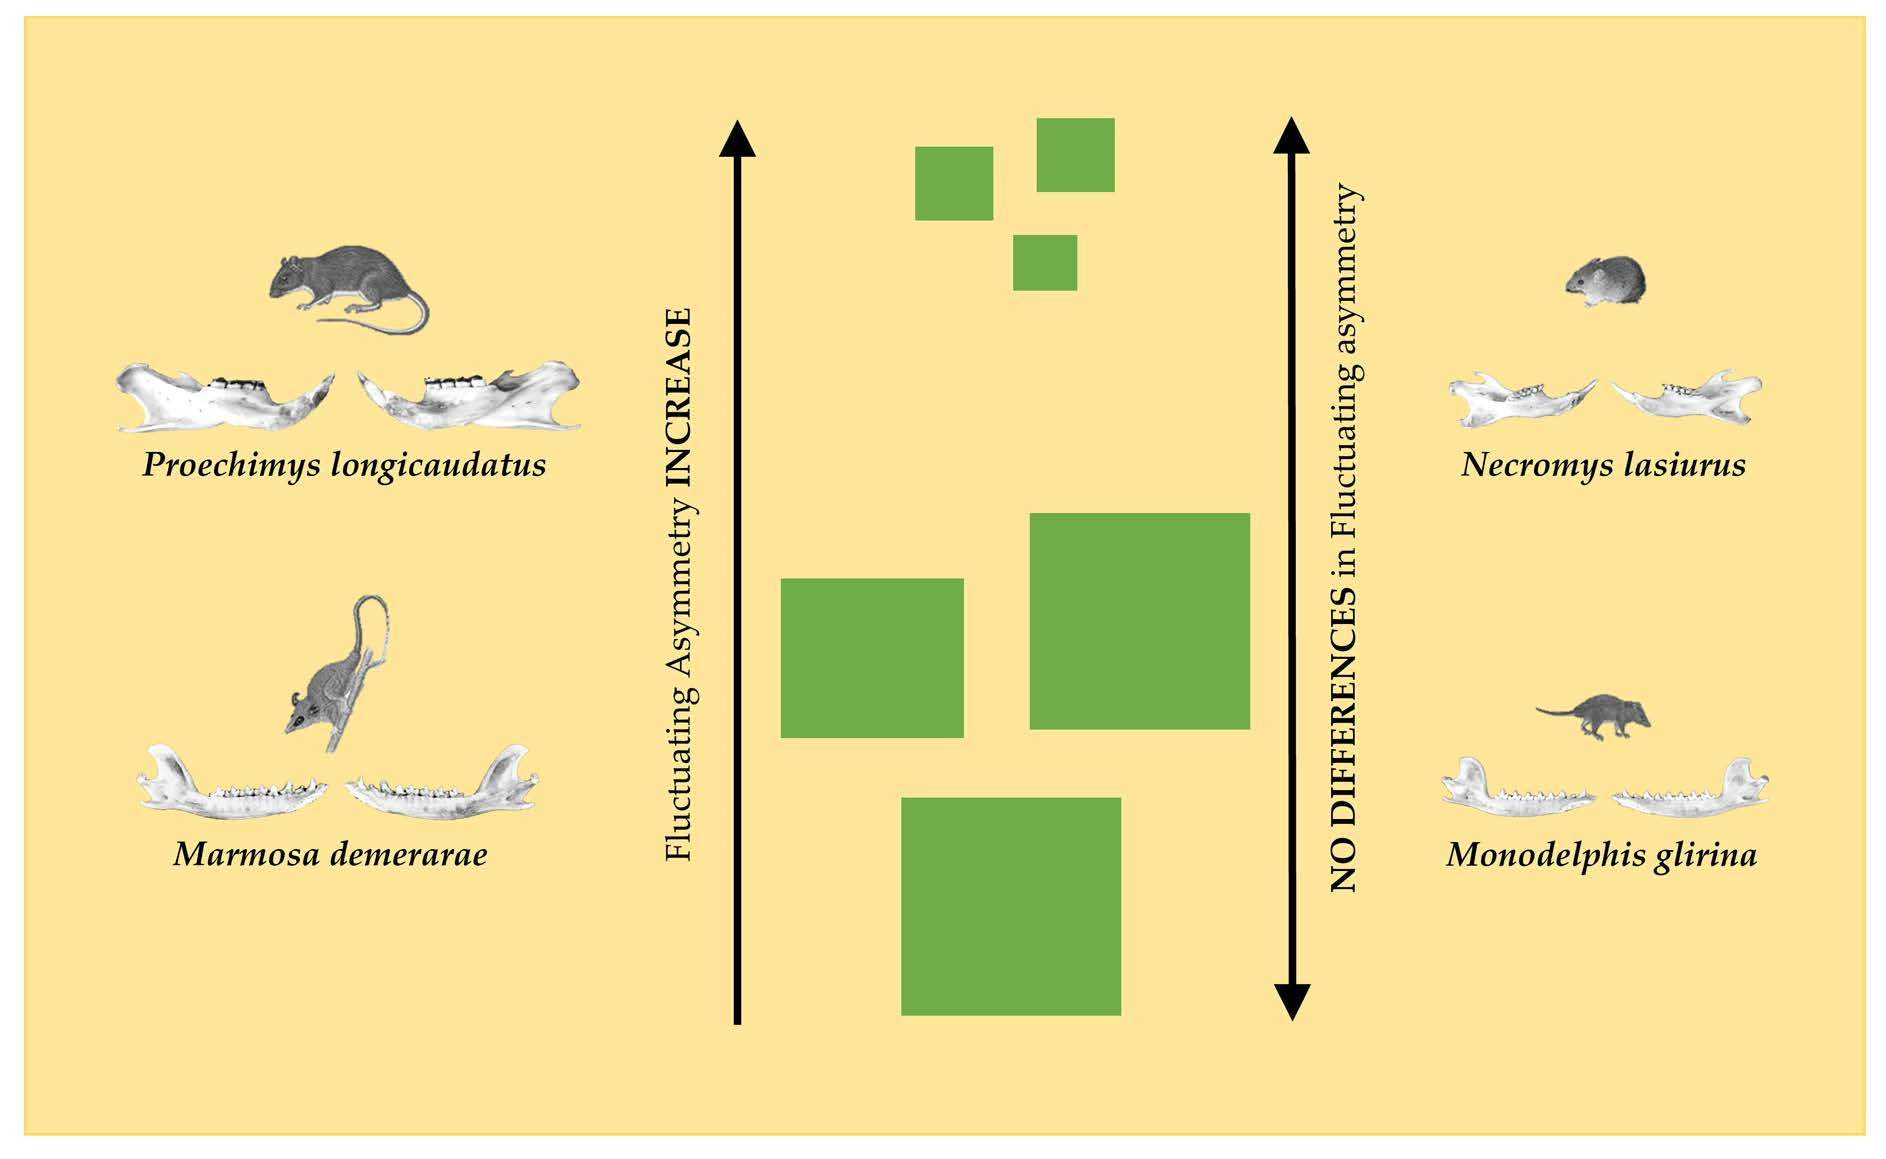 Dispersal limitation and weaker stabilizing mechanisms mediate loss of  diversity with edge effects in forest fragments - Krishnadas - 2021 -  Journal of Ecology - Wiley Online Library